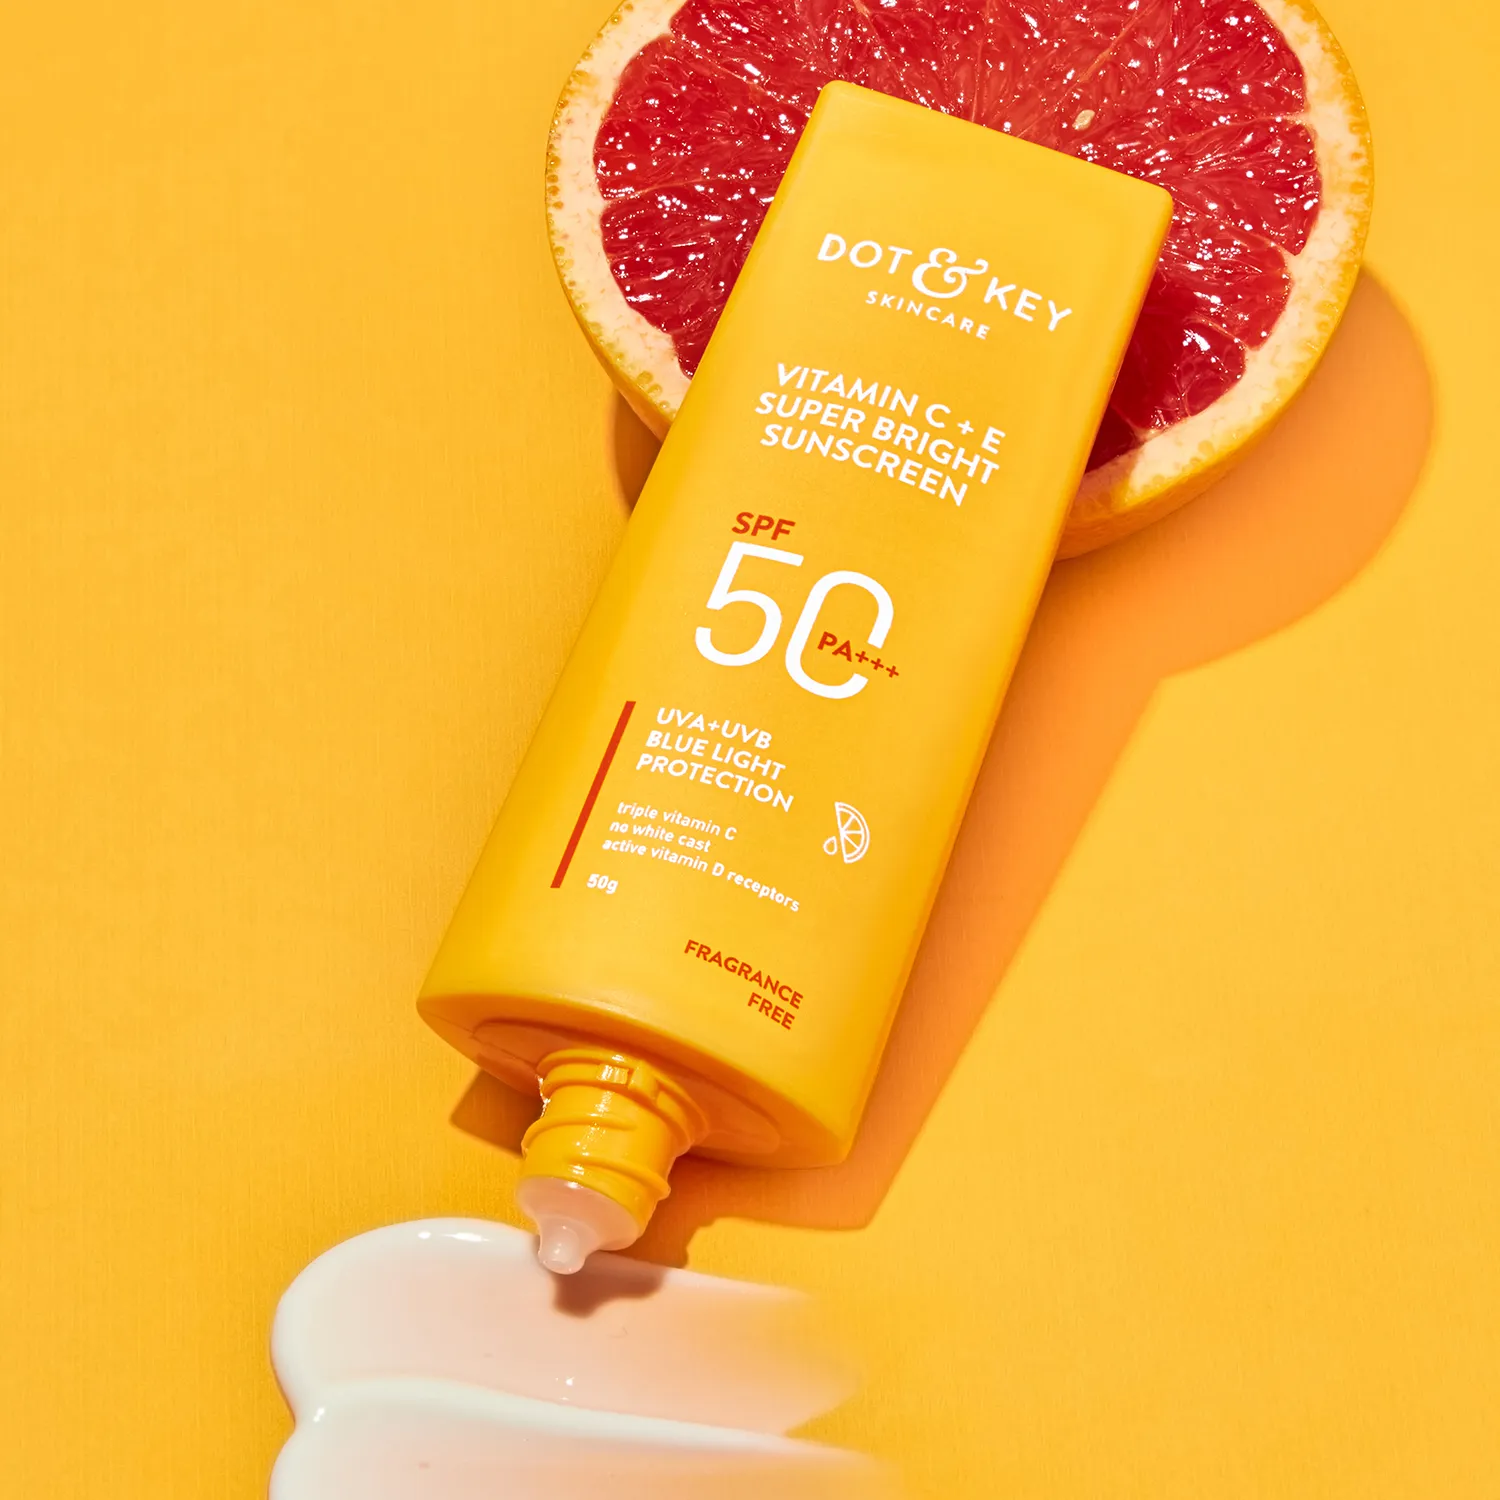 One of the top sunscreen for face